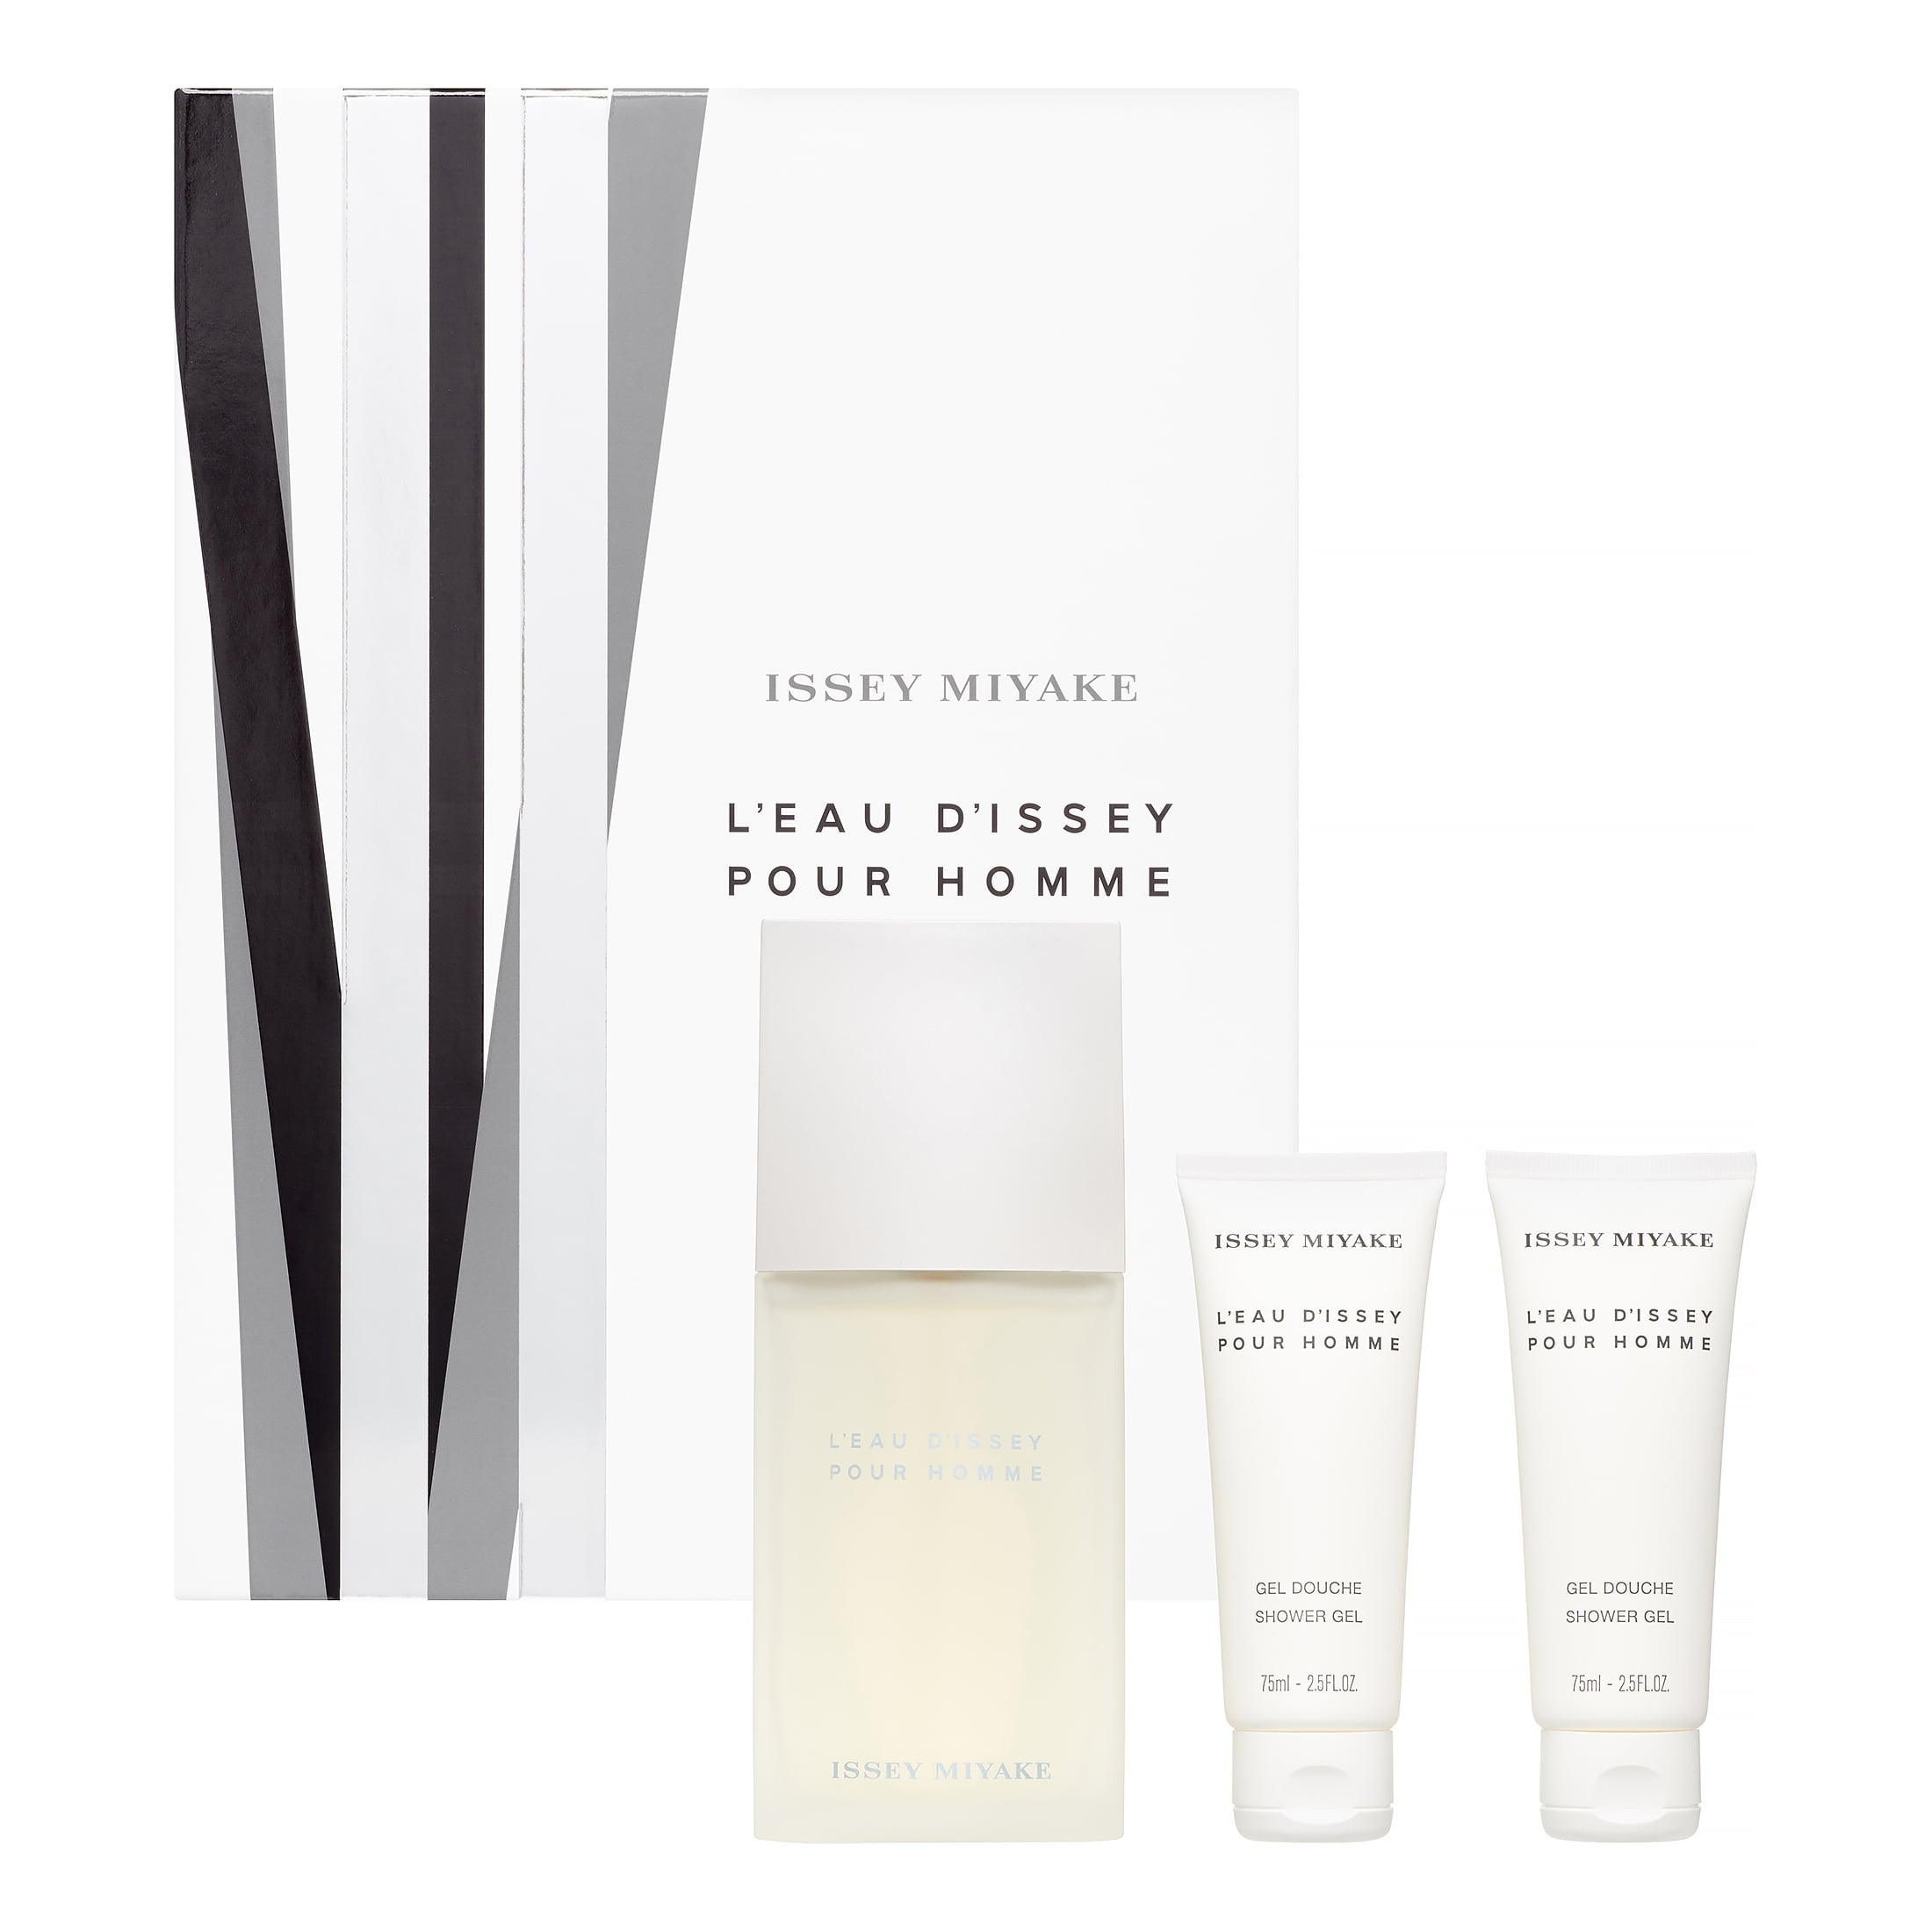 Issey Miyake L'eau D'issey Cologne Gift Set for Men, 3 Pieces - Walmart.com